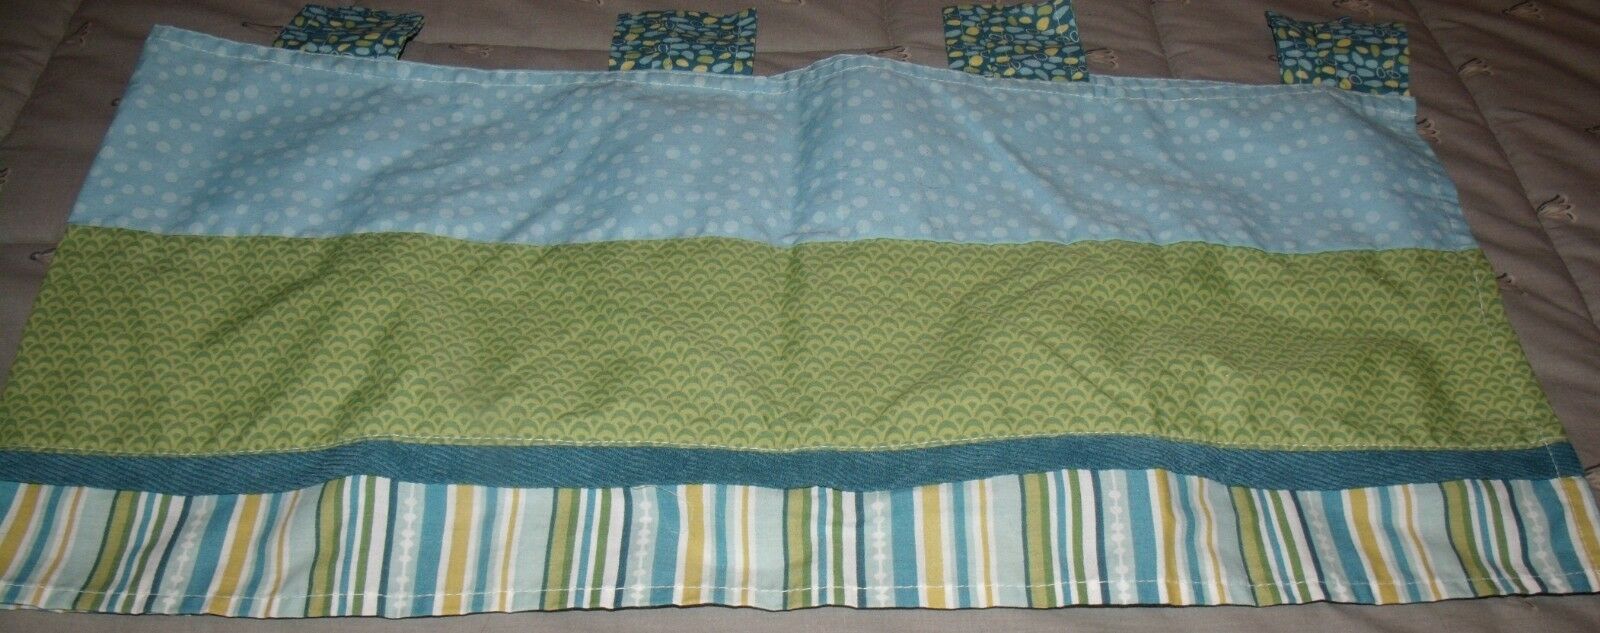 cocalo window valance blue gold green strips blue polka dots